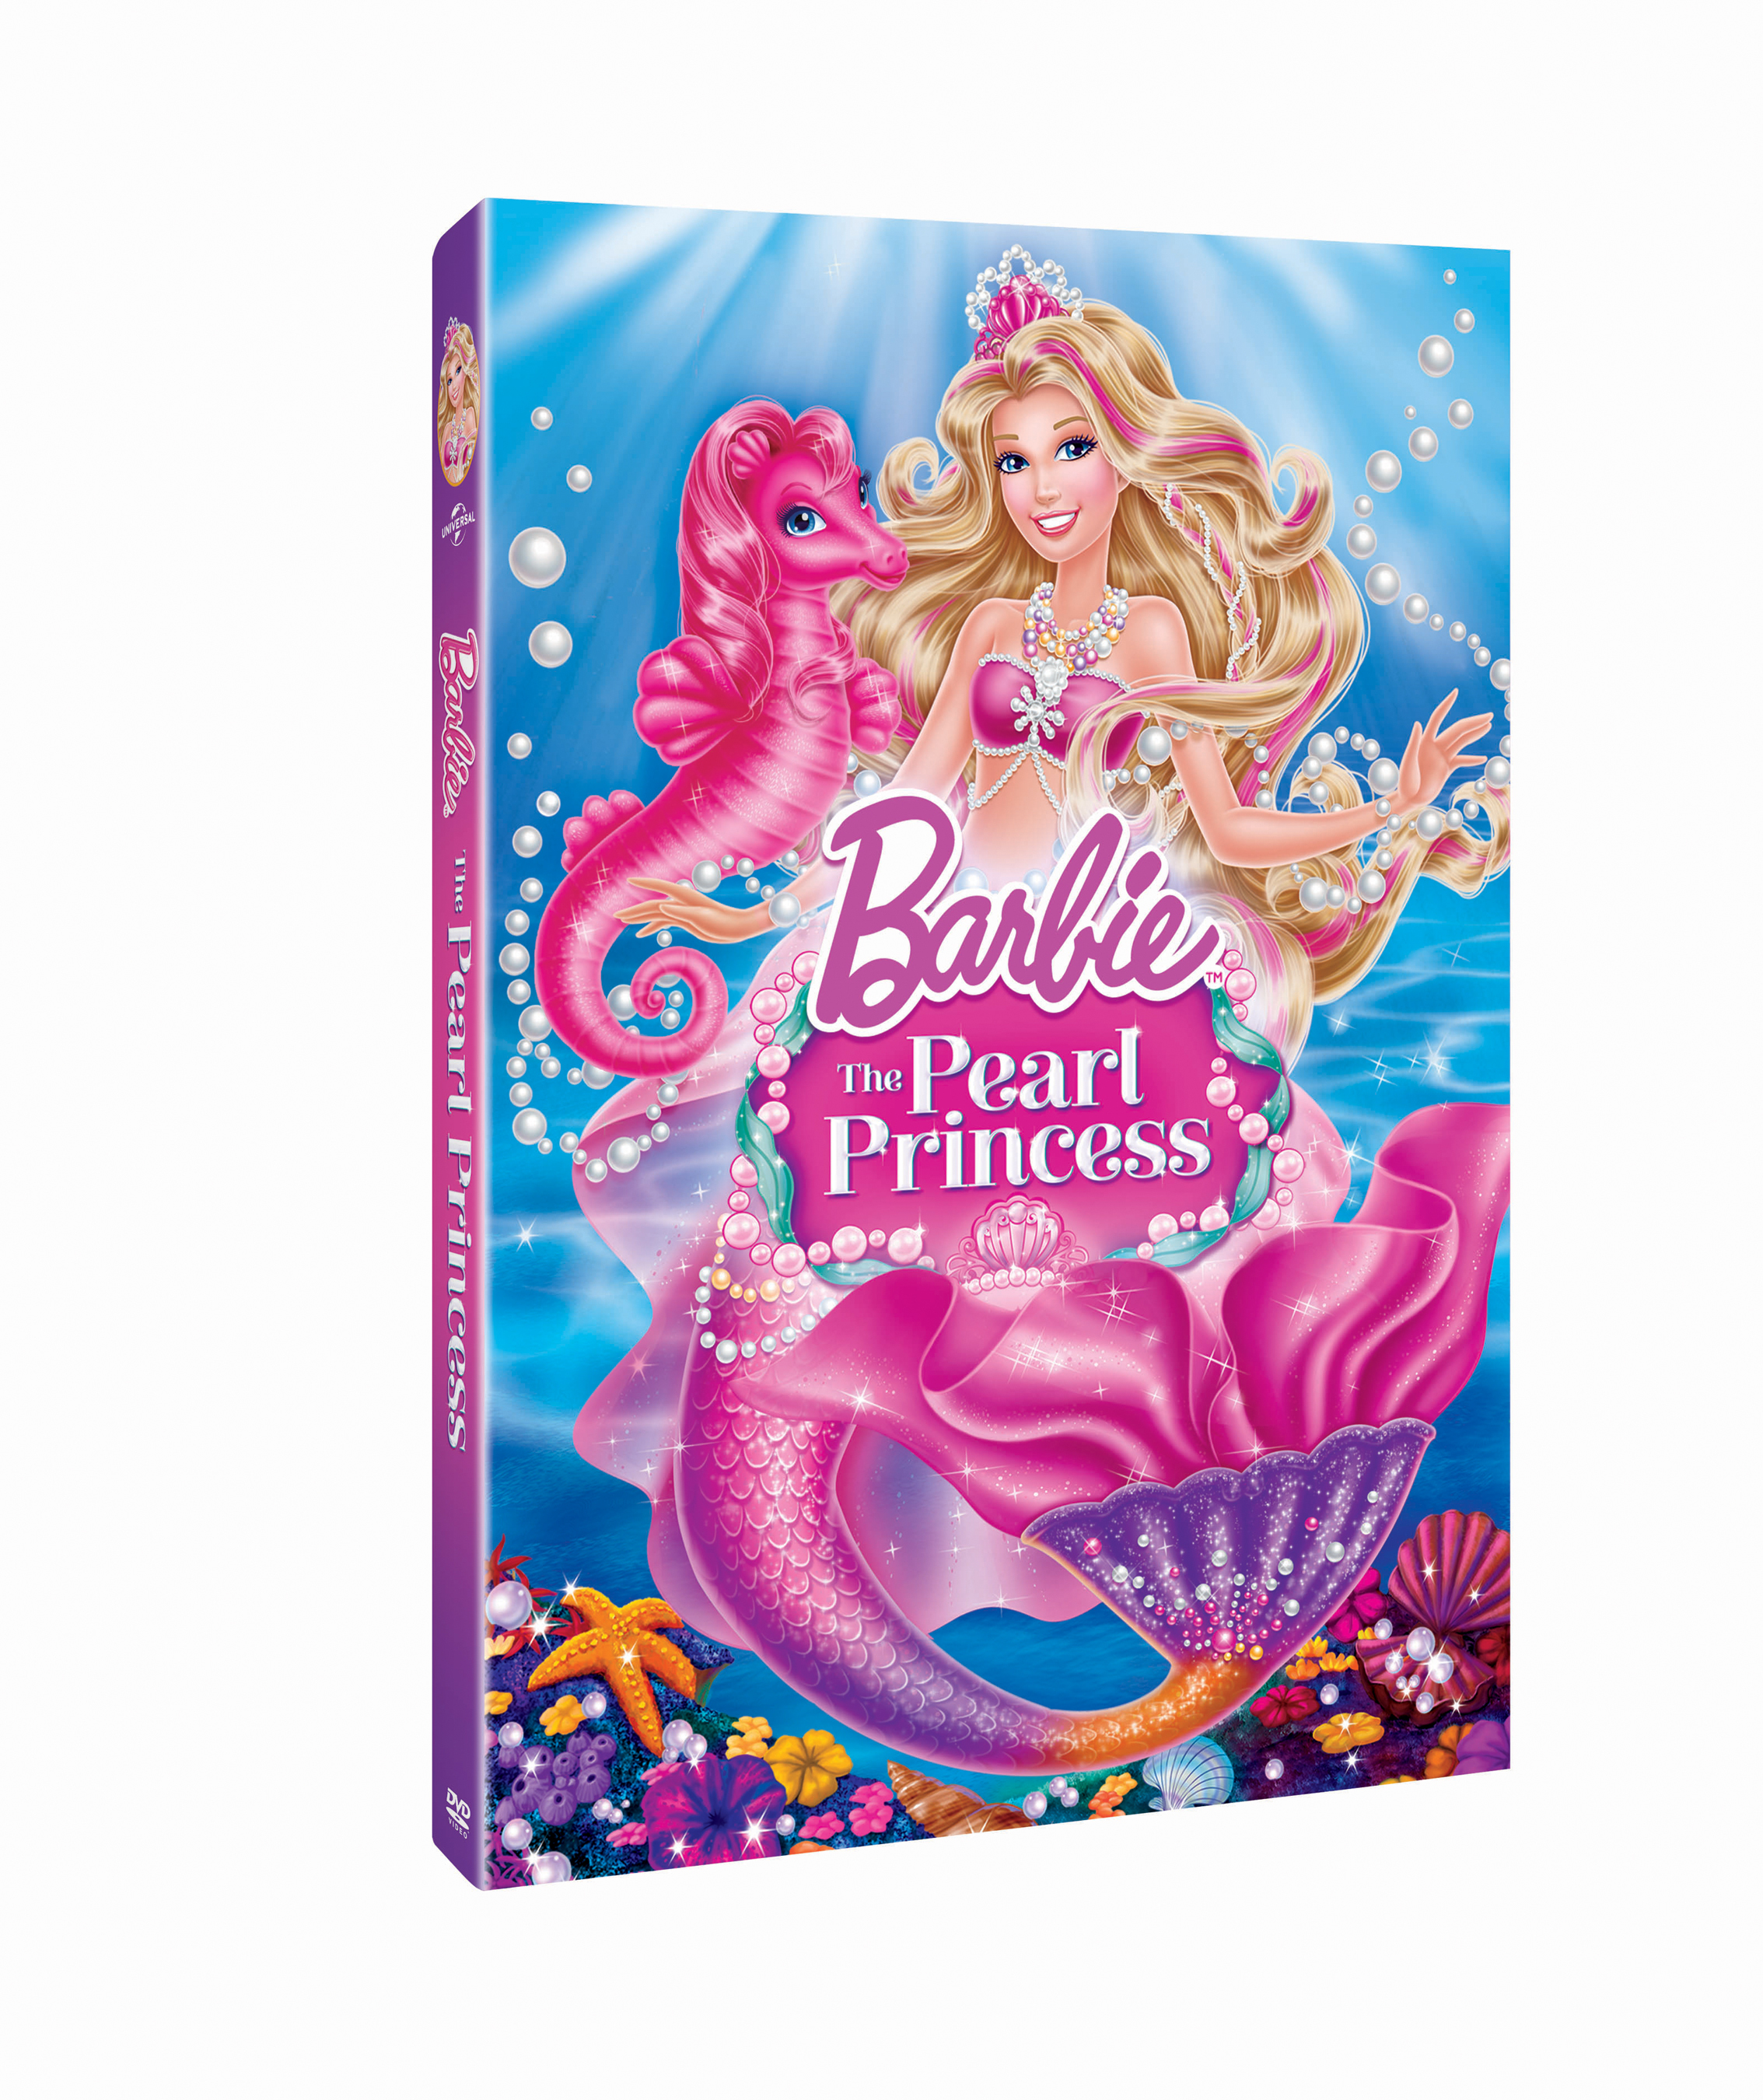 barbie the pearl princess full movie in english